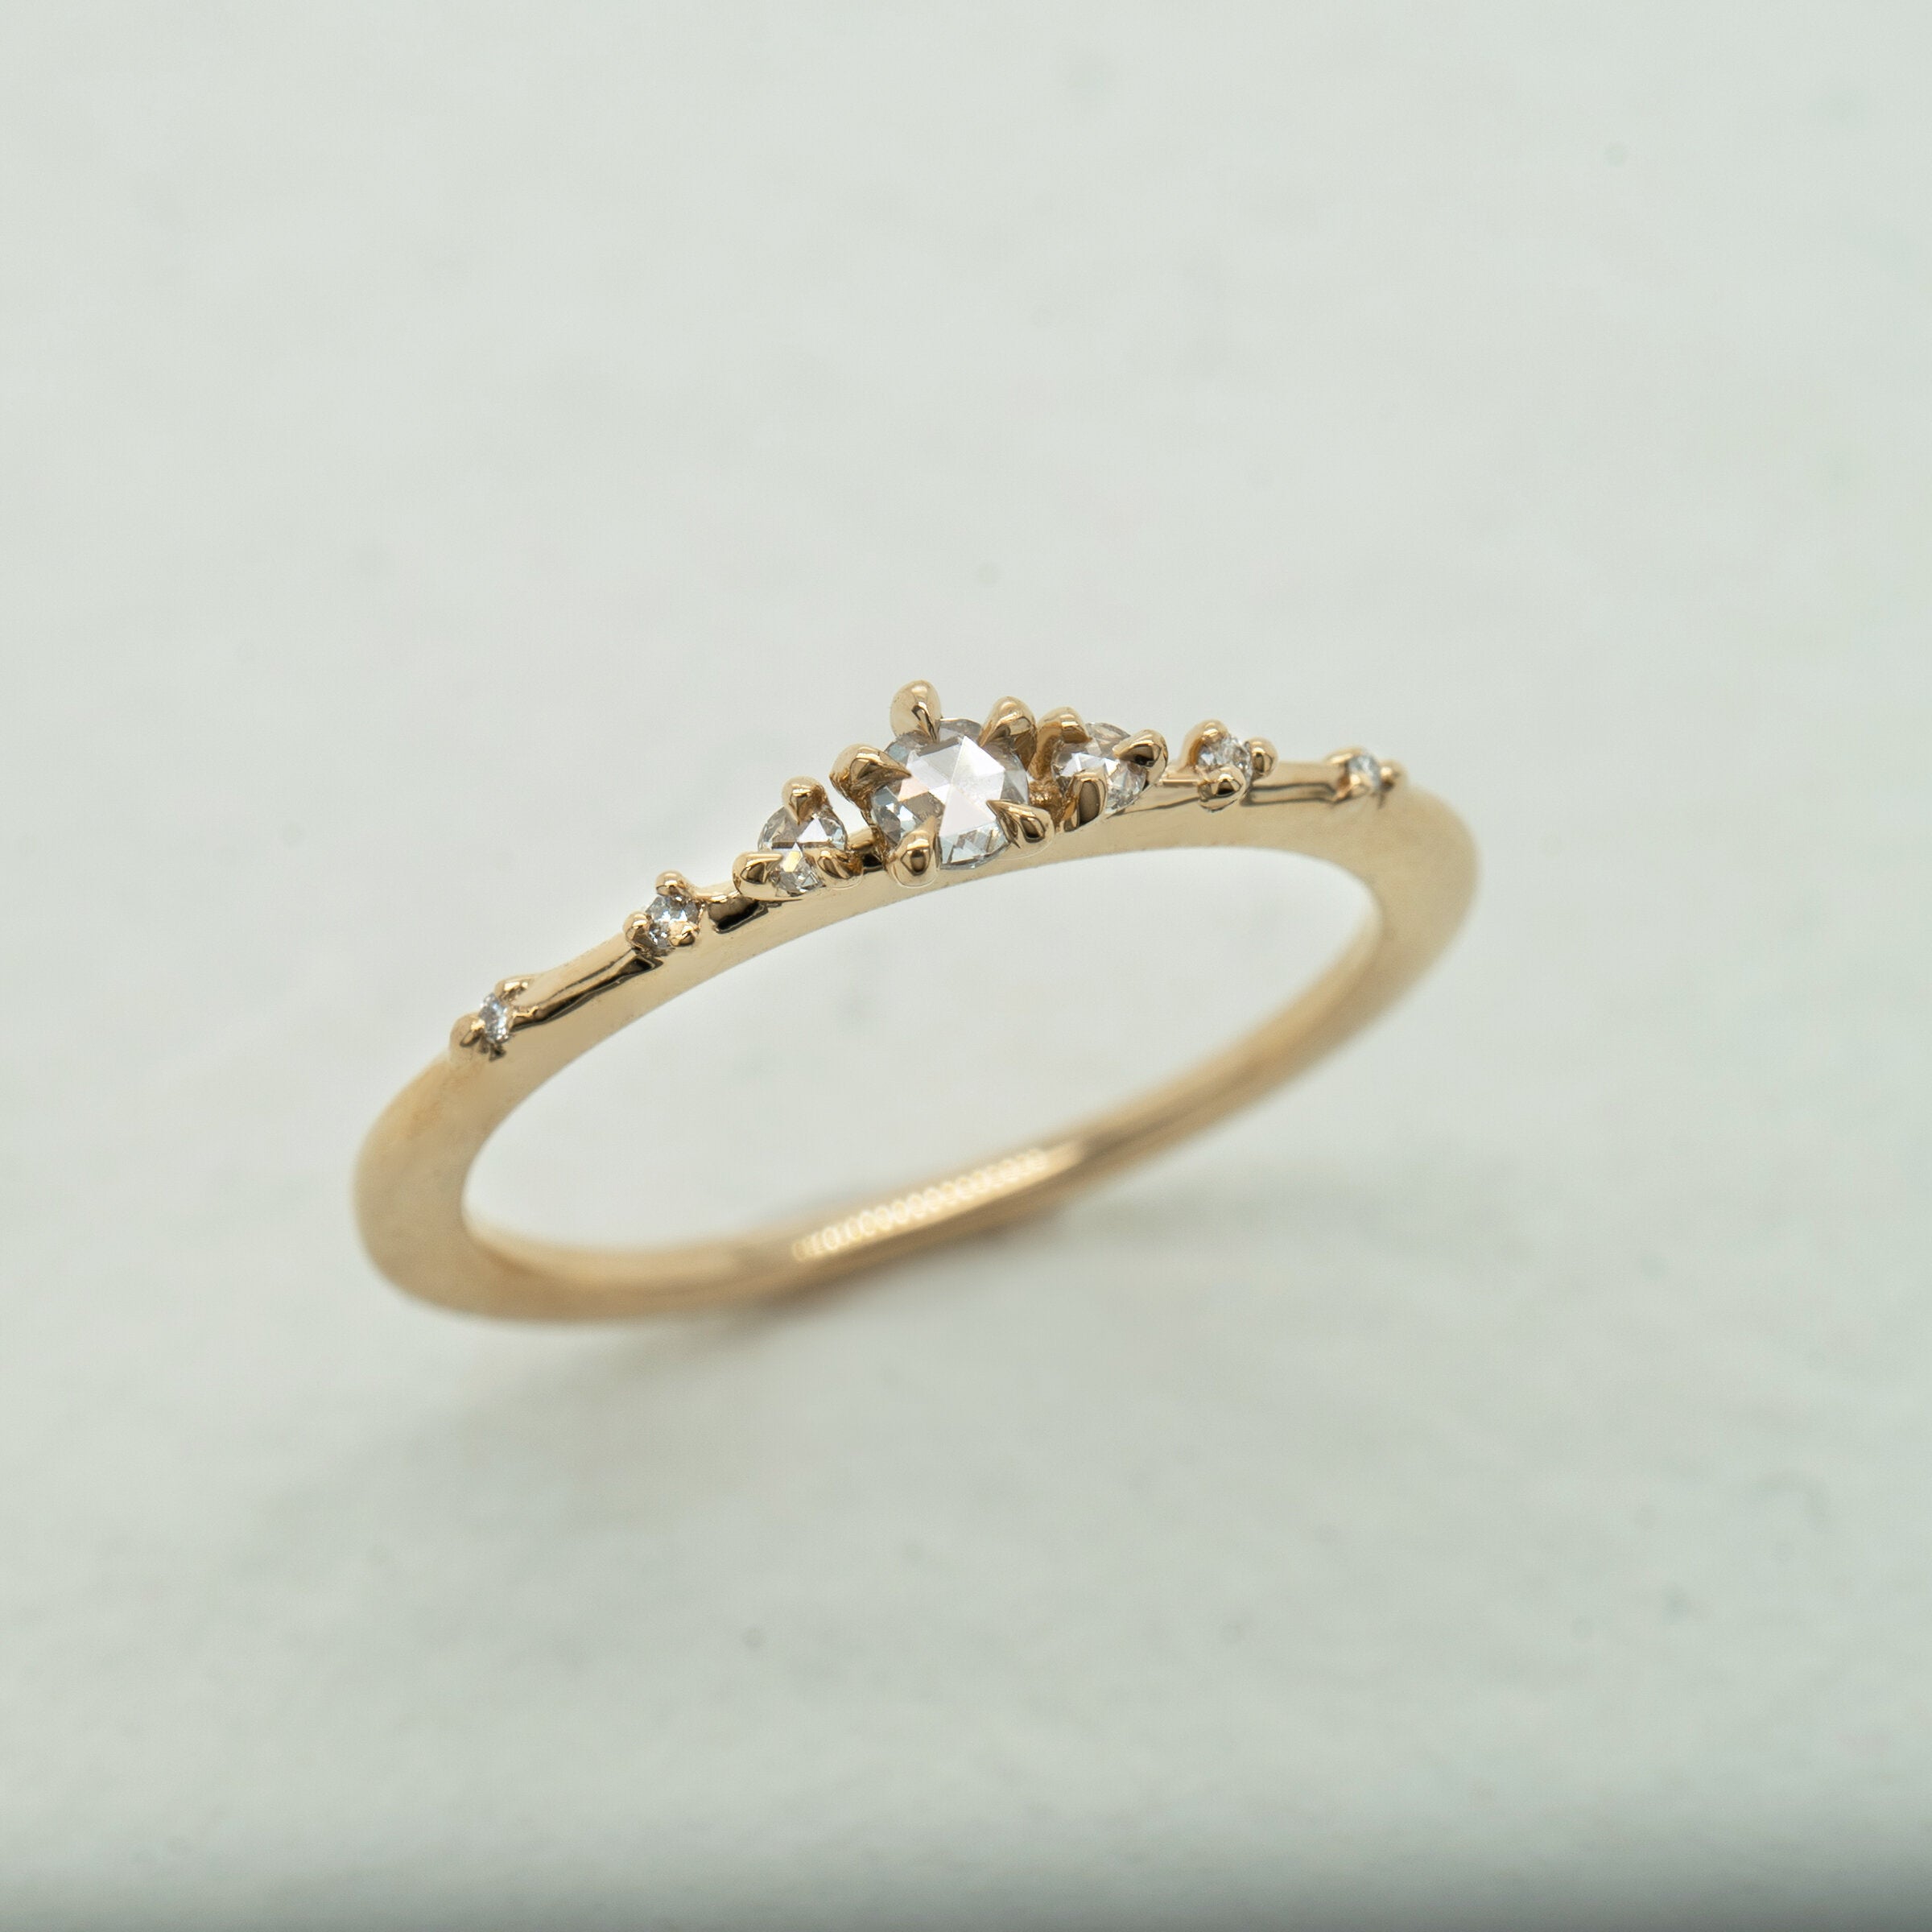 A product photo of Laurie Fleming Jewellery's "Water Lily Ring," a delicate solid gold stacking ring with round brilliant and rose cut diamonds scattered along the band. The ring is on a light grey background.